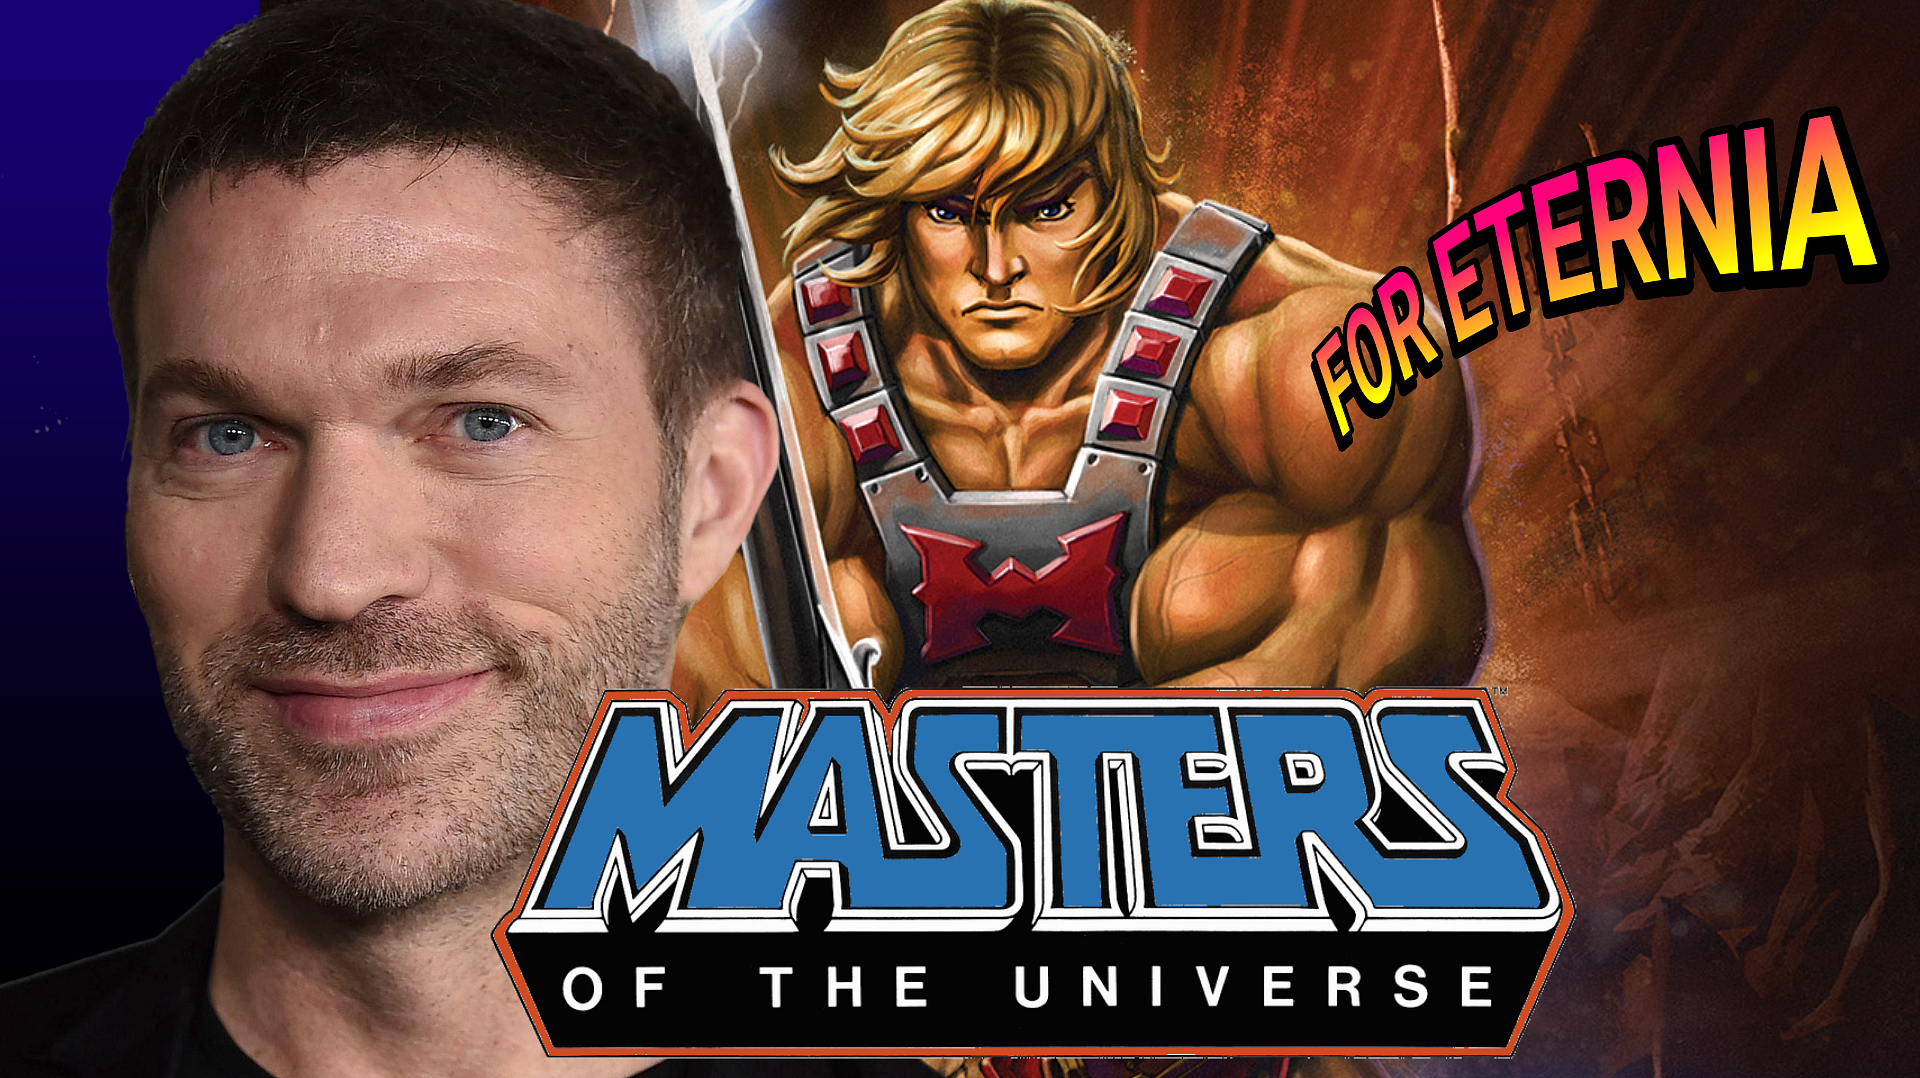 ”Bumblebee” Director Travis Knight eyed to direct new ”Masters of the Universe” Live-Action Movie!